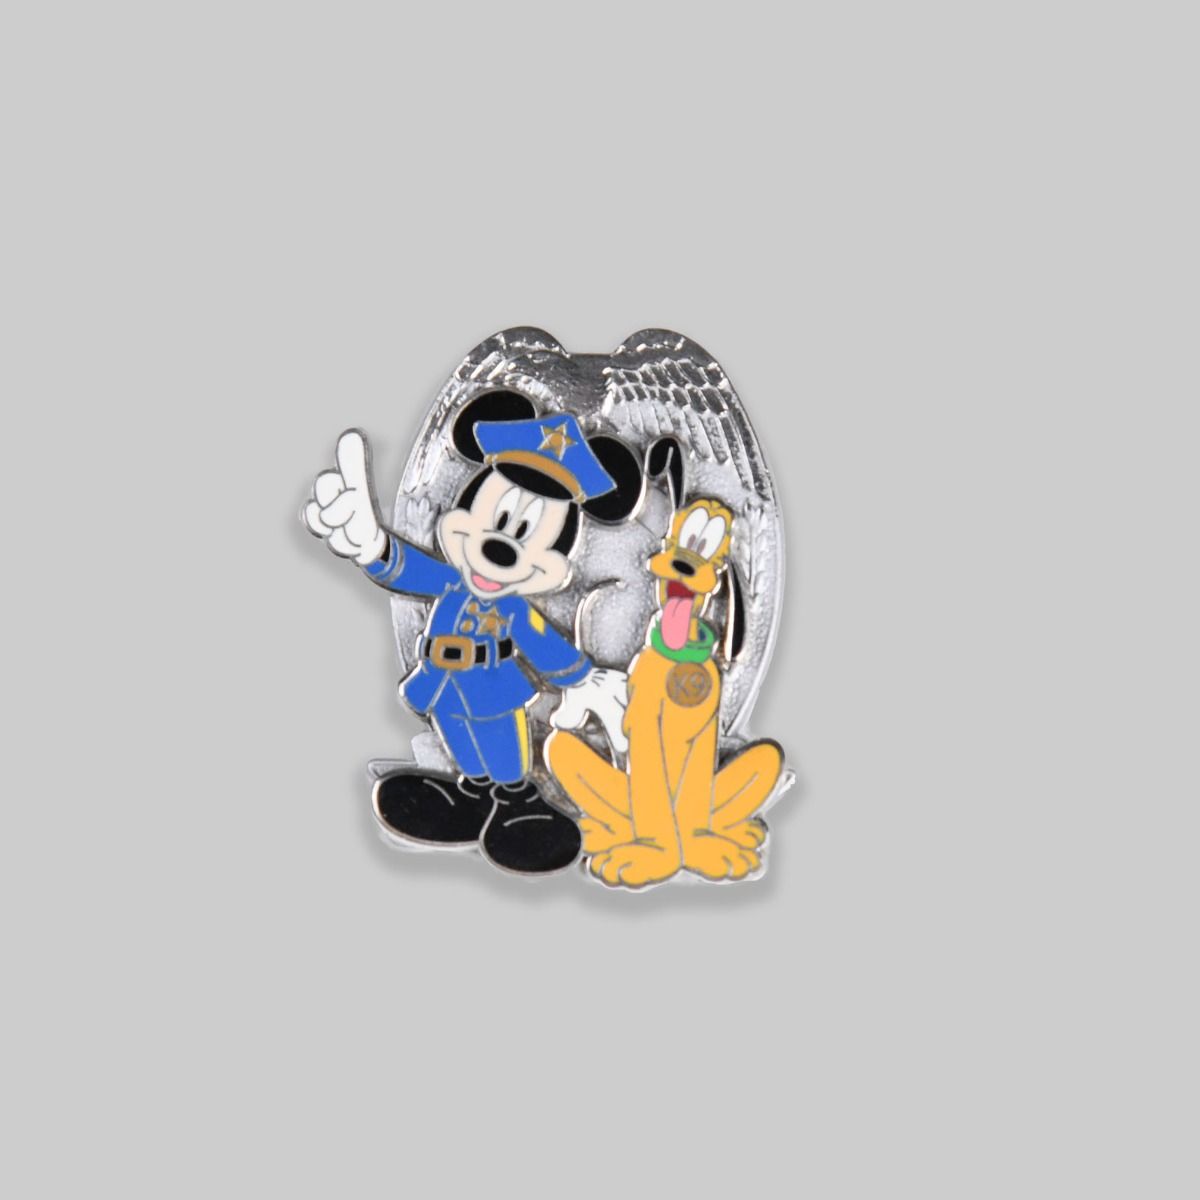 Disney Police Officer Mickey Mouse K9 Dog Pluto Pin Badge